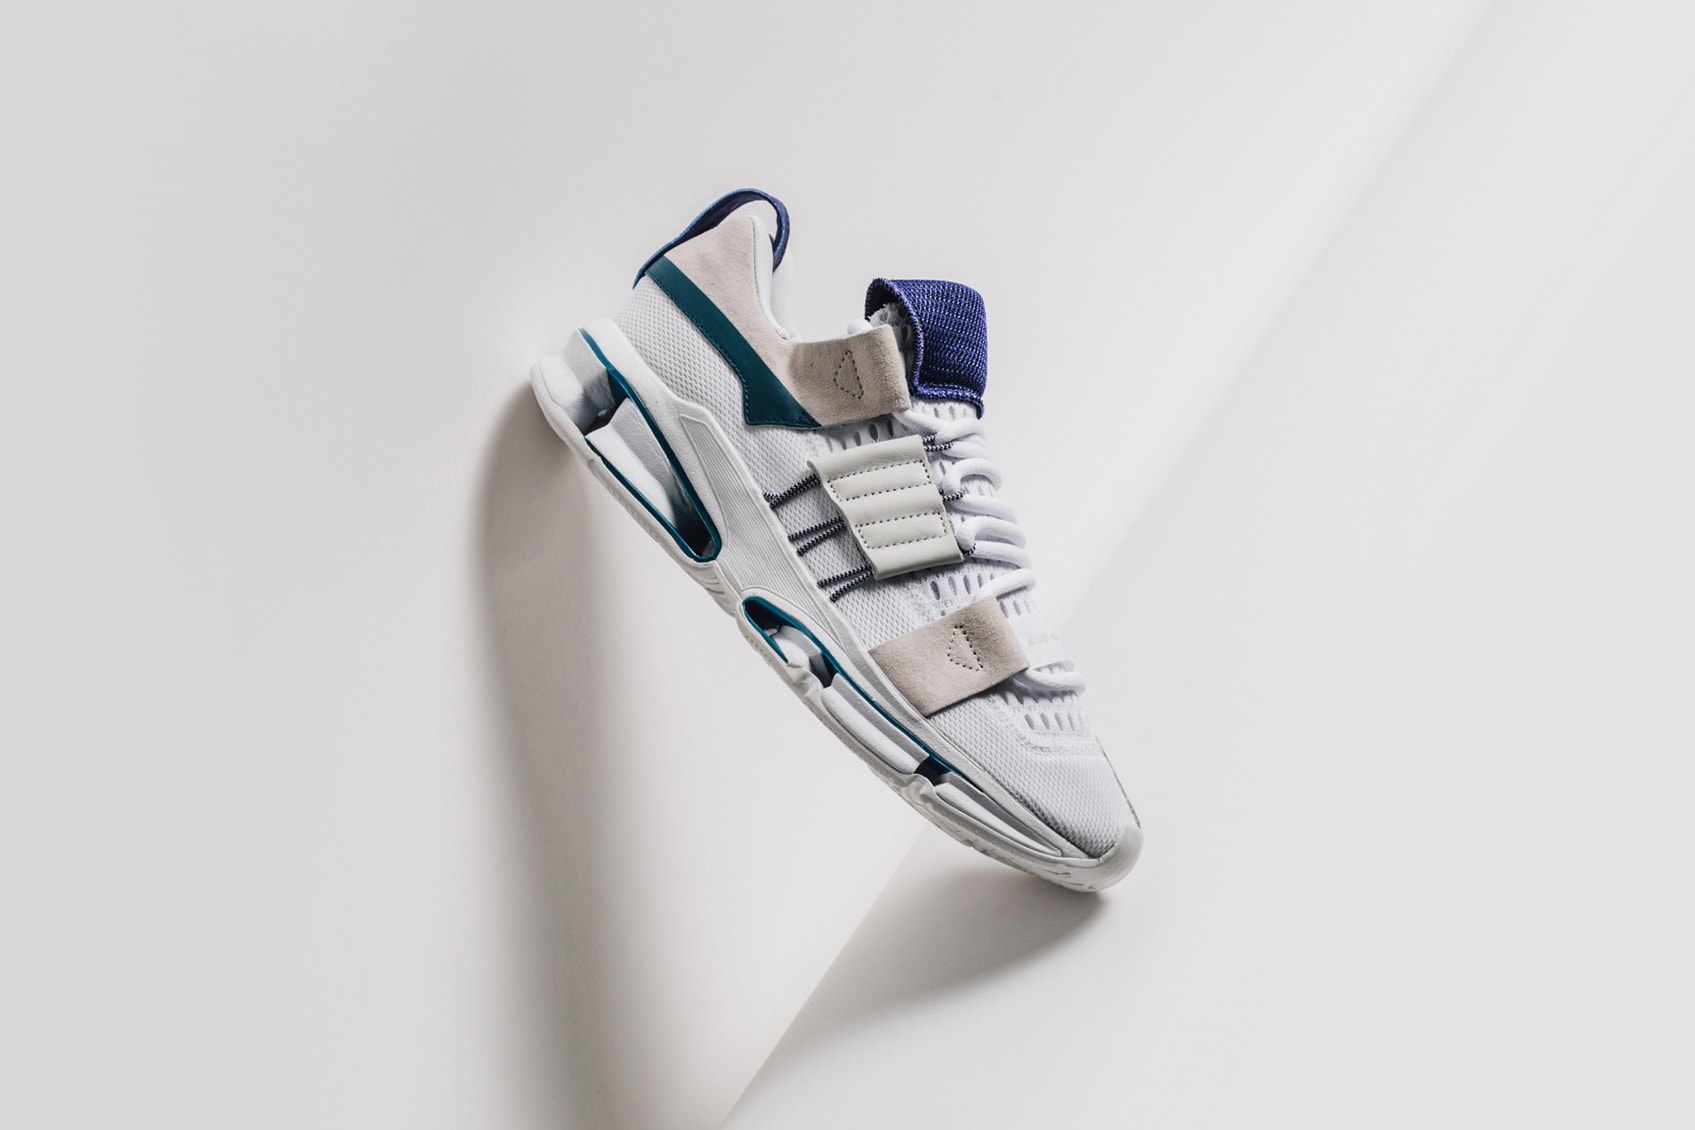 adidas Twinstrike ADV "Flat White/Regal Purple" Closer Look New Colorway Sneakers Kicks Trainers Shoes Available Now Feature Sneaker Boutique